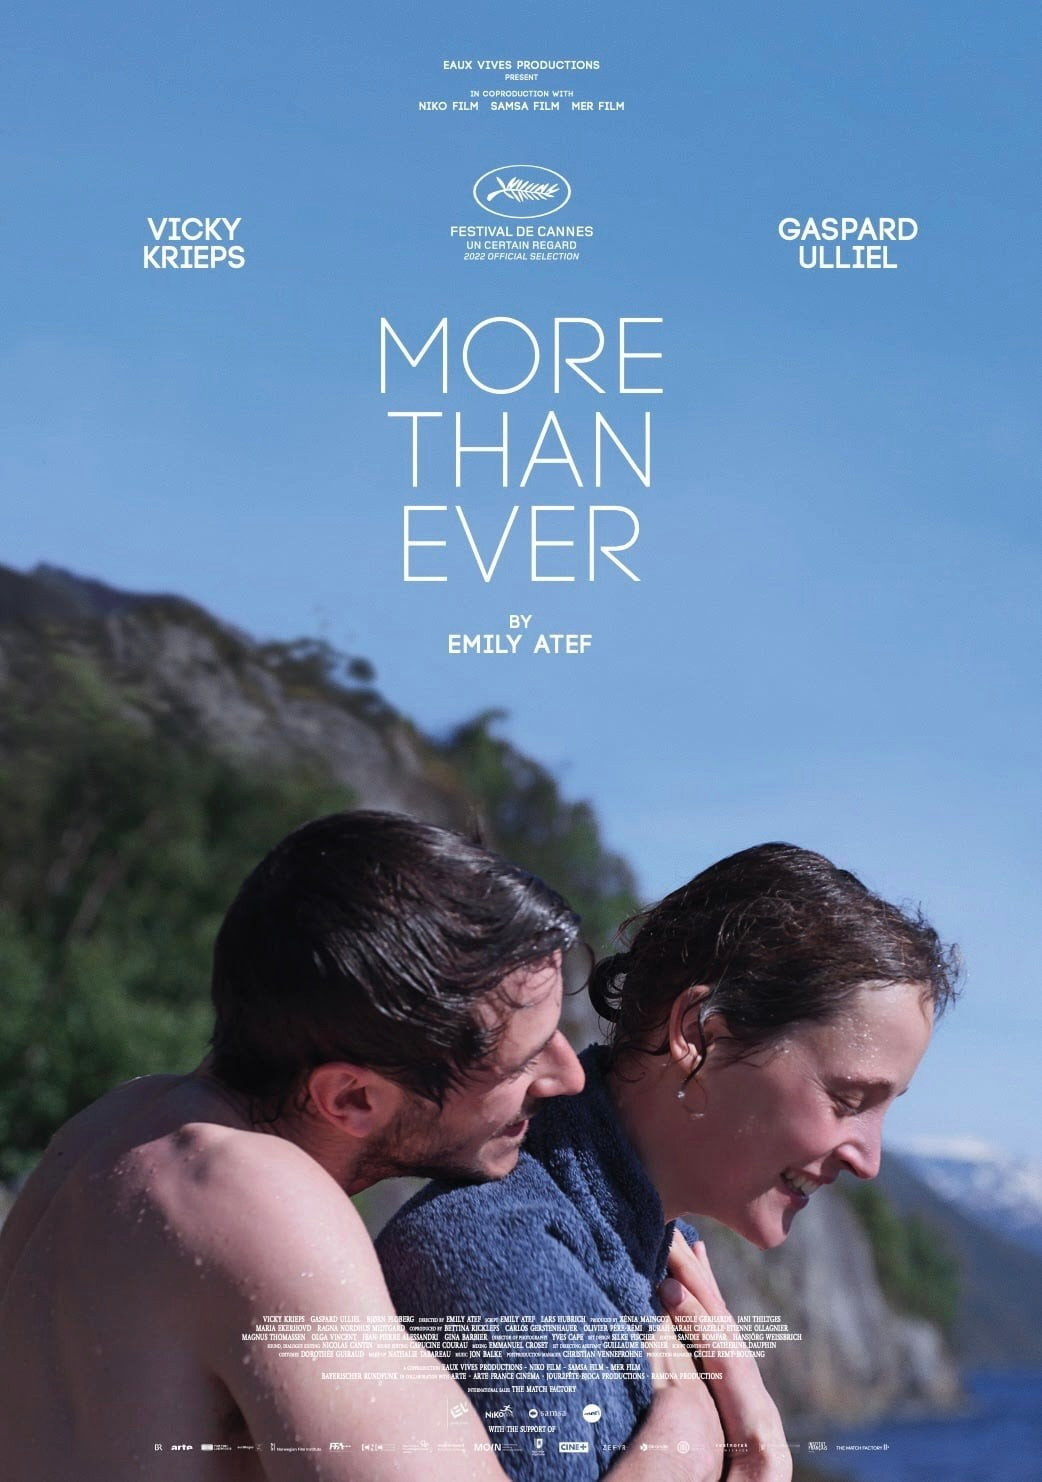 The poster for the film 'More than ever', in which Vicky Krieps shares the screen with Gaspard Ulliel. (Photo: Samsa Film)